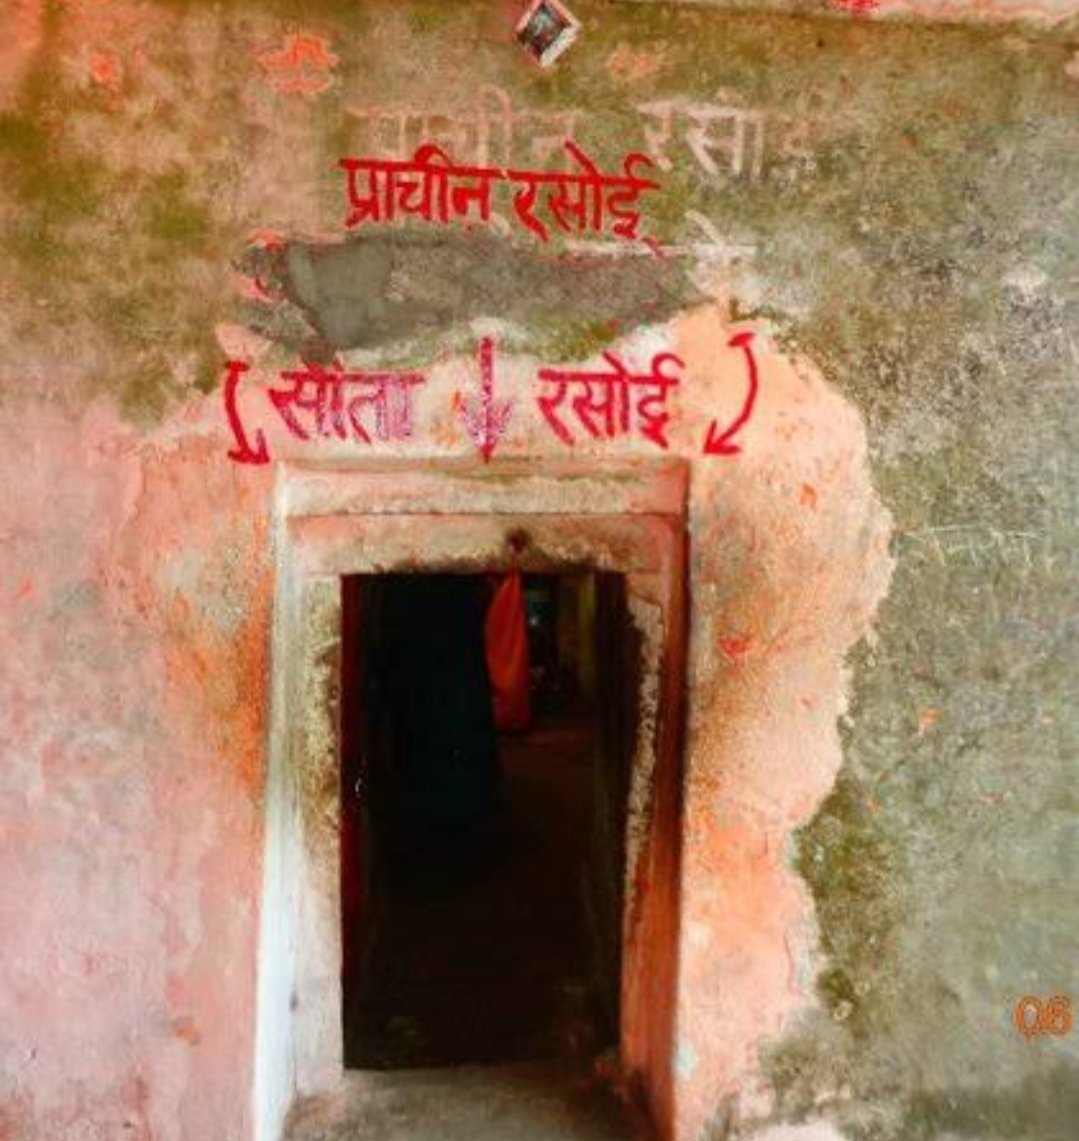 Right above Hanuman dhaara, is a small room called 'Sita Rasoi' which has a small rolling pin made on a rock. It's believed Maa Sita used to cook here.